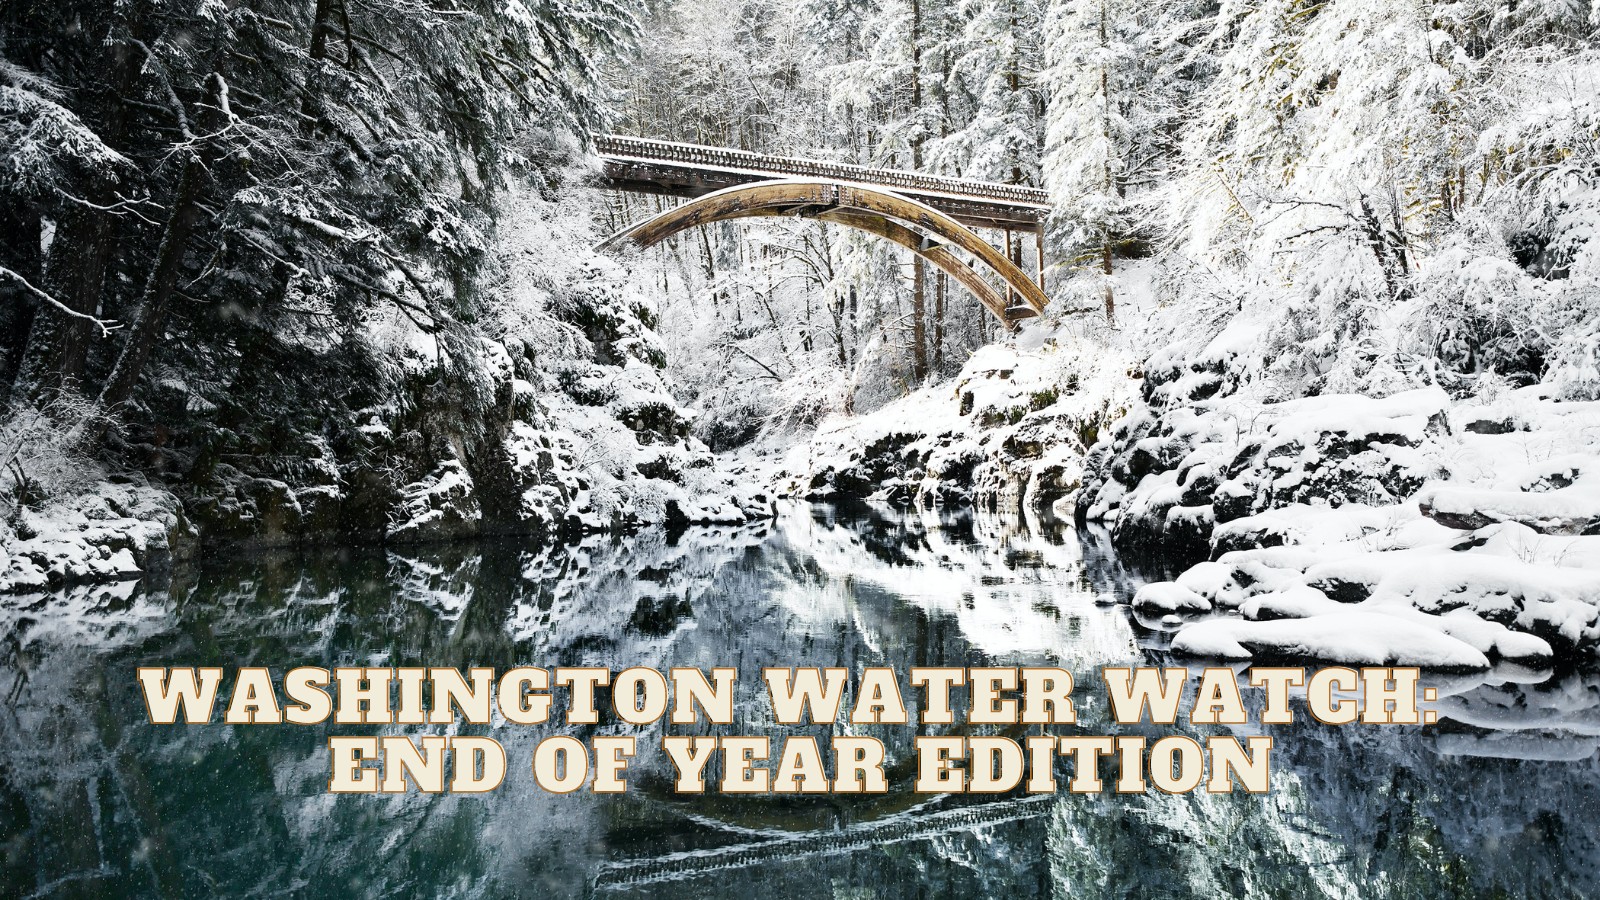 Image of snowy river scene with overlay text that reads "Washington Water Watch: End of Year Edition"